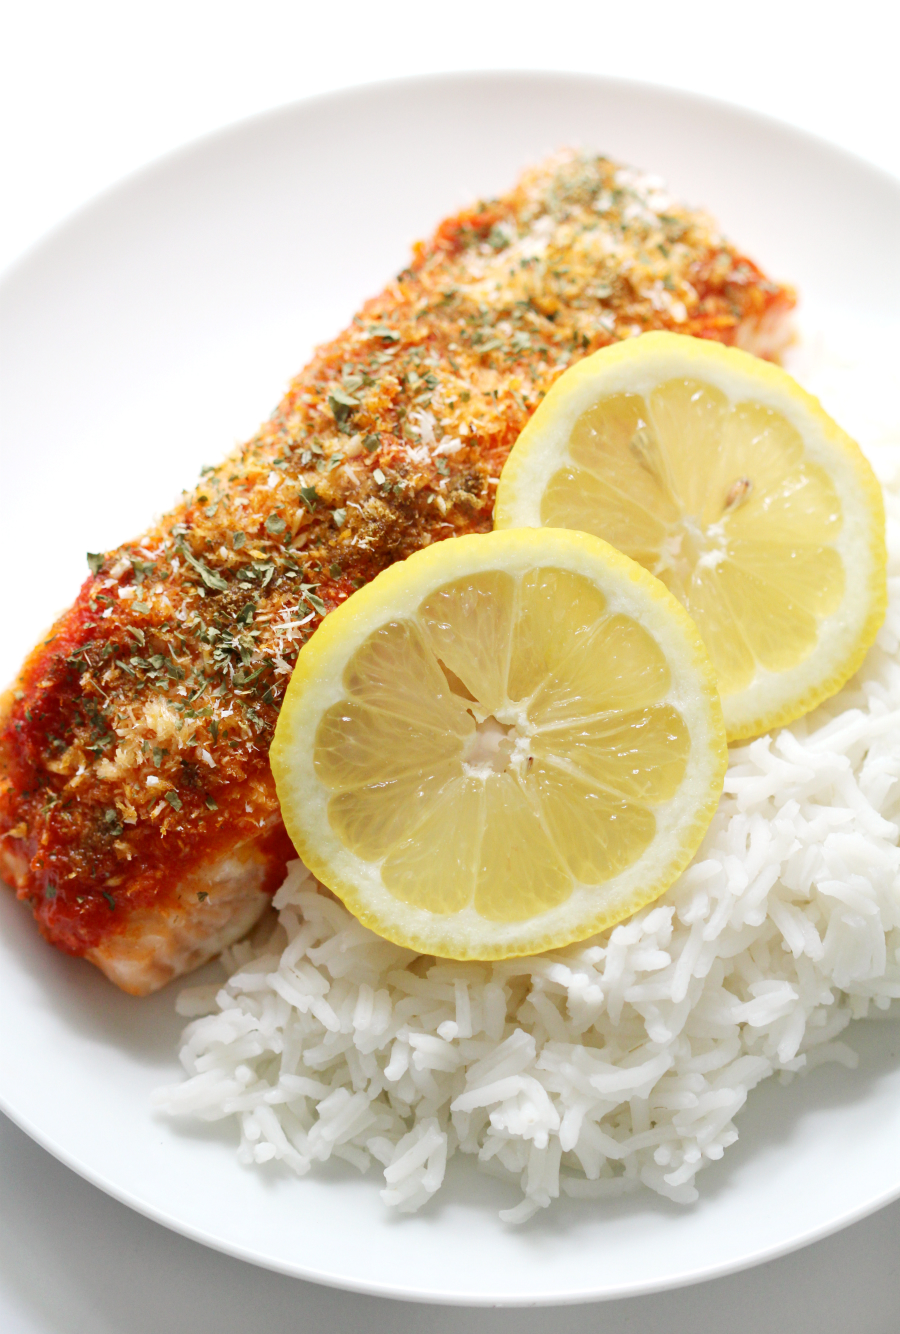 Harissa Salmon with Shredded Coconut | Strength and Sunshine @RebeccaGF666 A delicious new way to flavor up your favorite fish! Harissa Salmon with Shredded Coconut is a healthy new recipe to add to the dinner plate. Gluten-Free, paleo, and whole 30 friendly, so you'll never be bored!